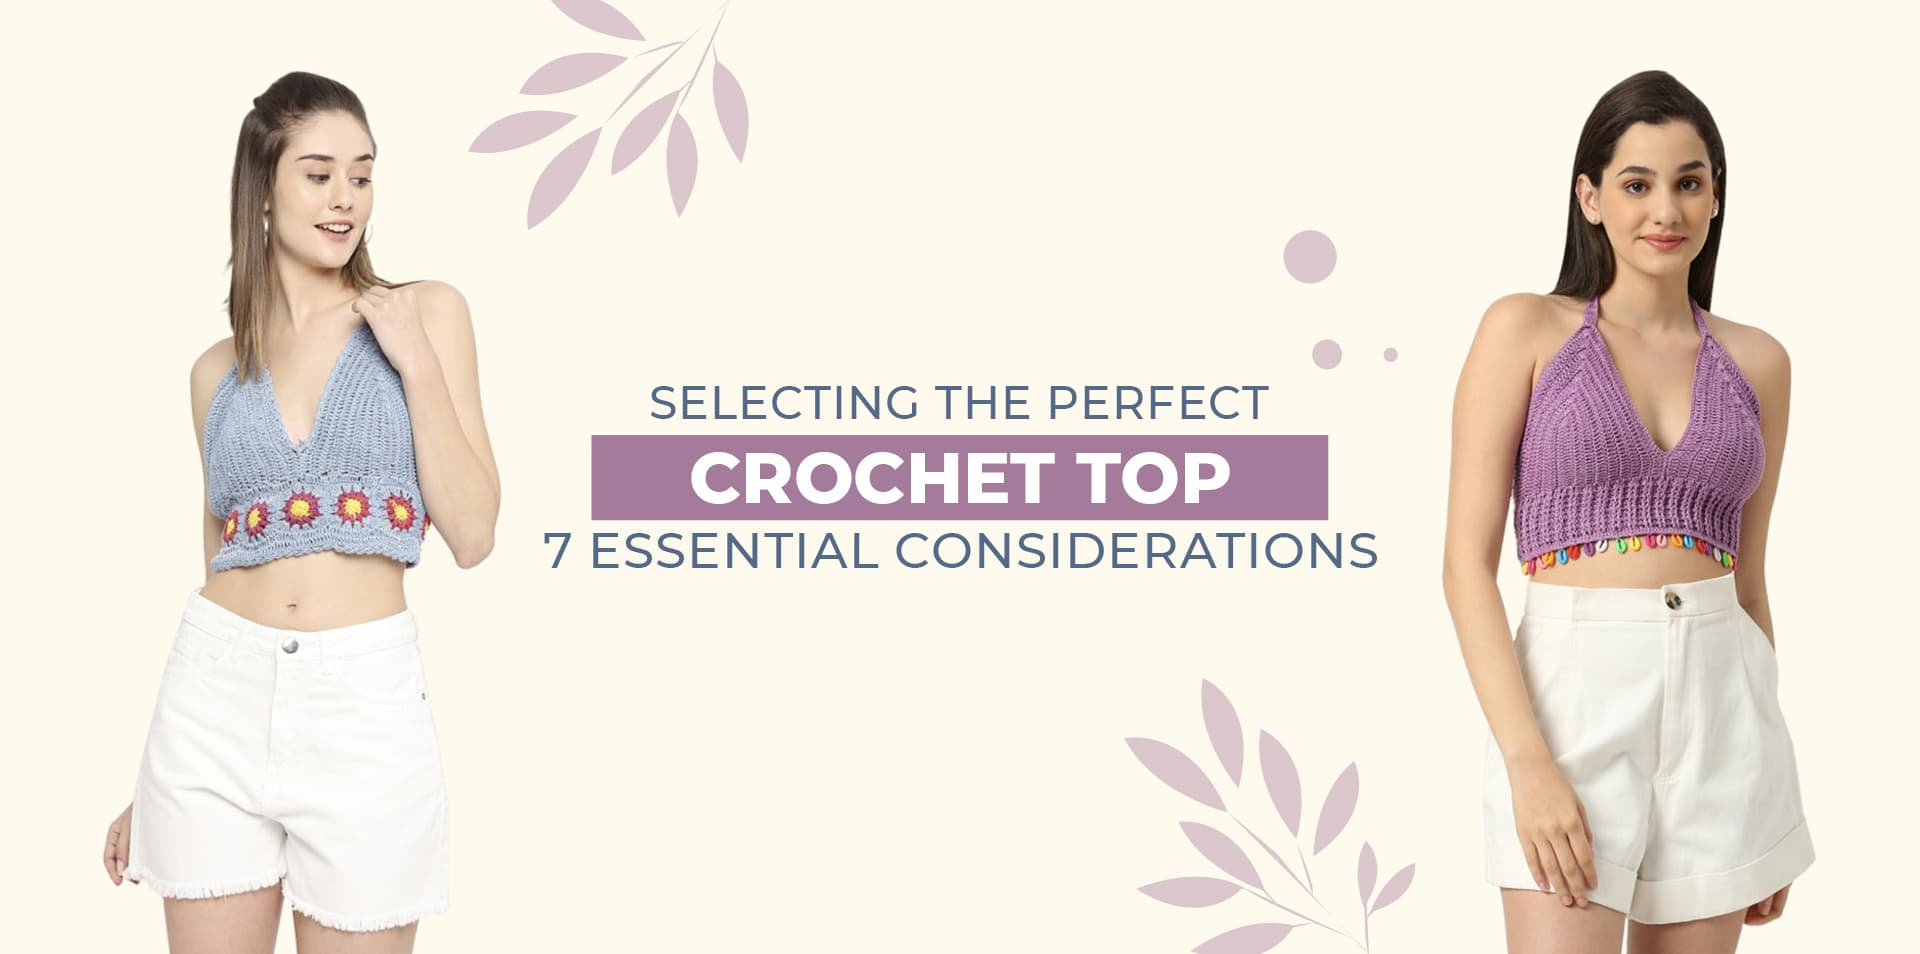 Selecting the Perfect Crochet Top: 7 Essential Considerations